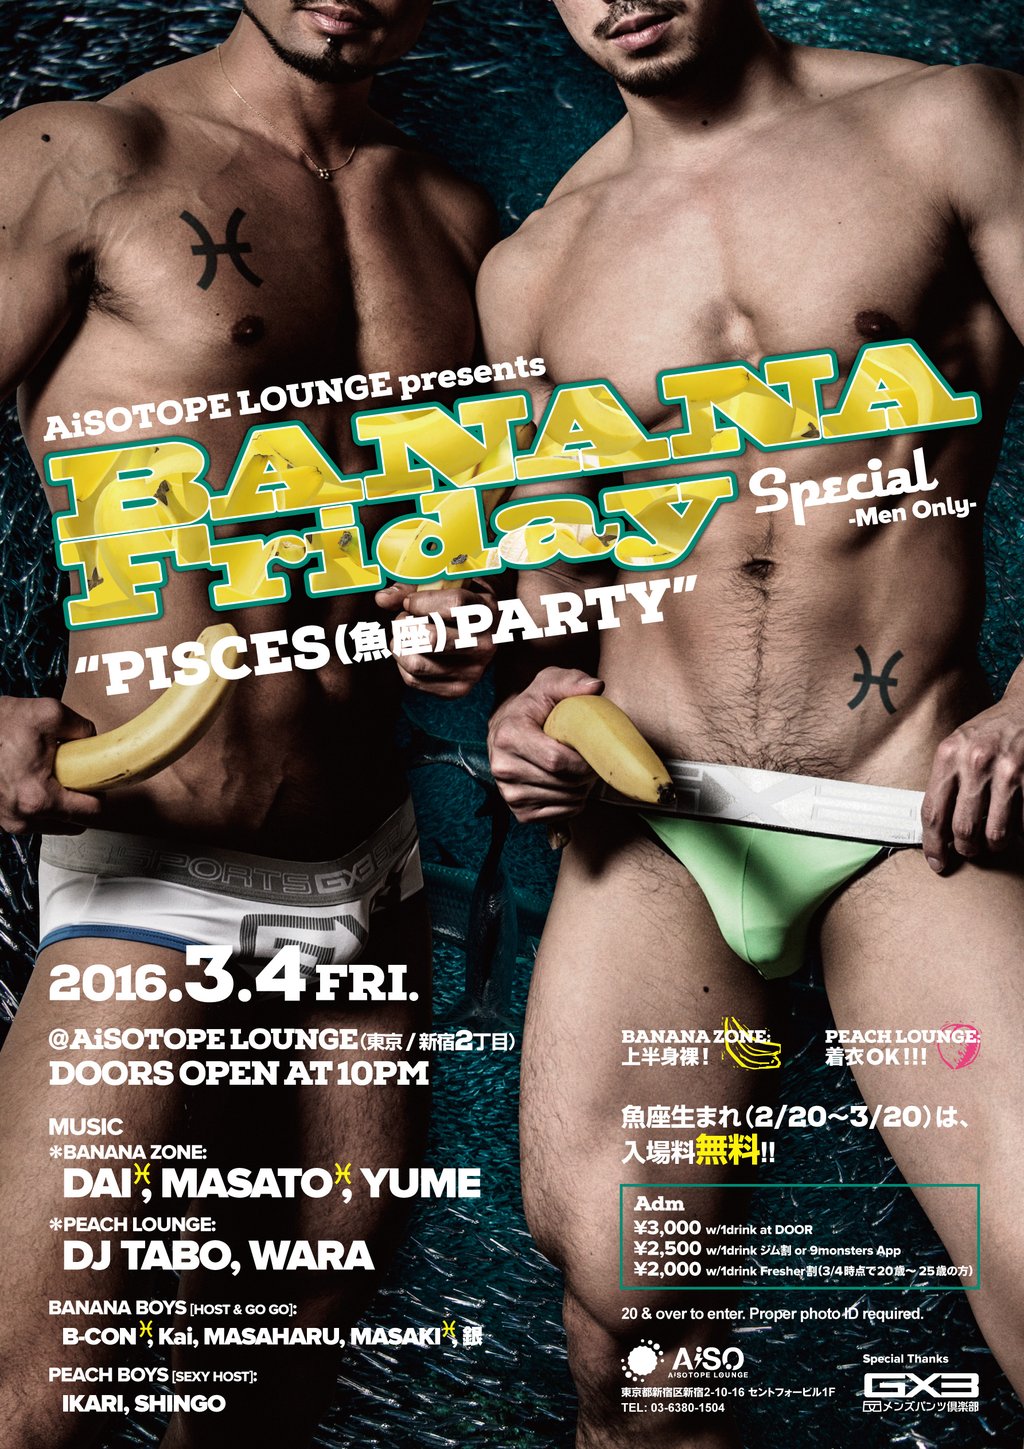 BANANA Friday Special 　“PISCES（魚座）PARTY”